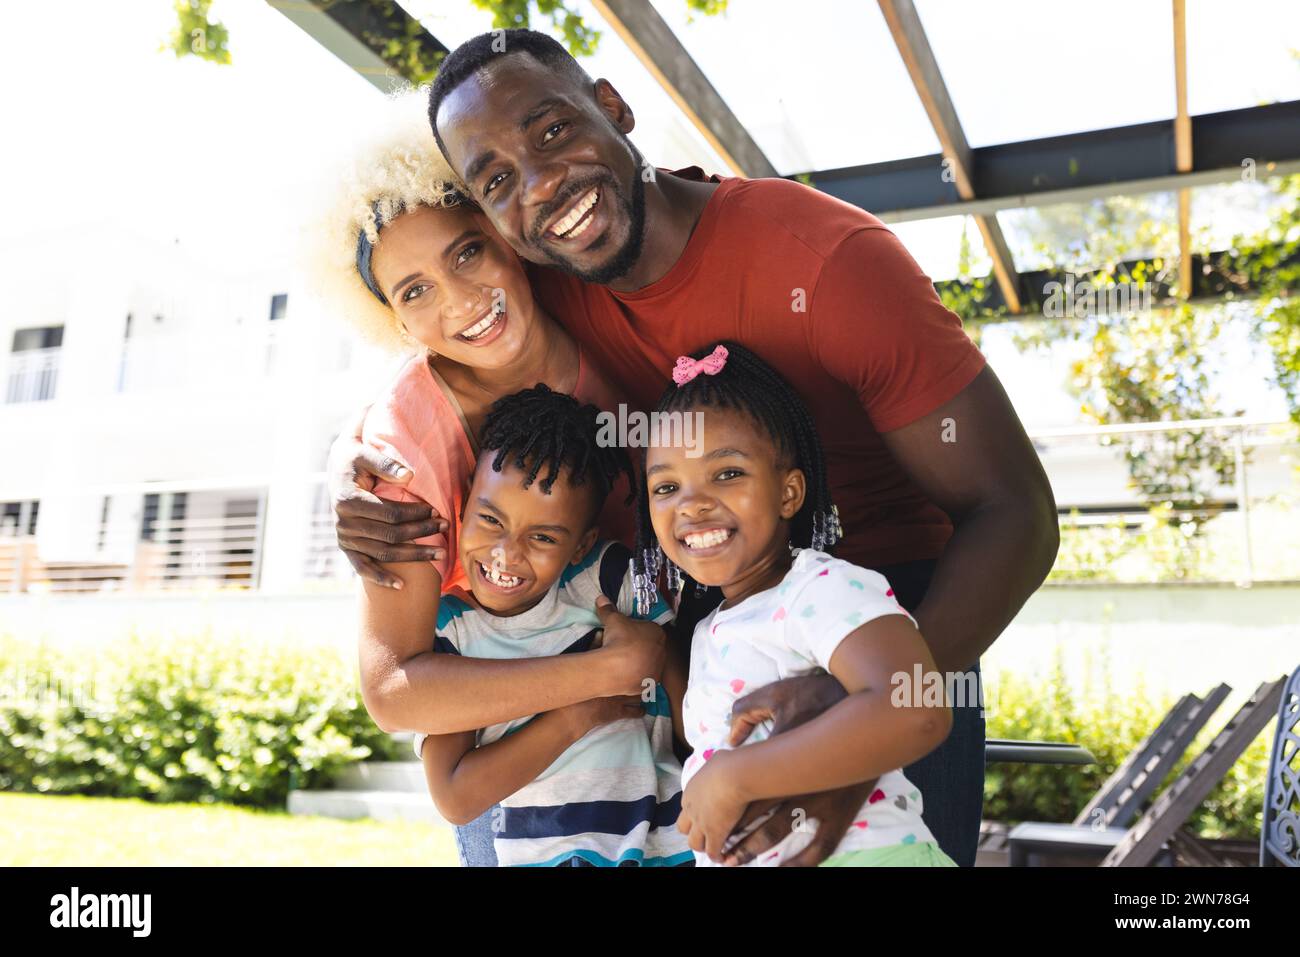 African American man and biracial woman embrace a boy and a girl, all smiling Stock Photo